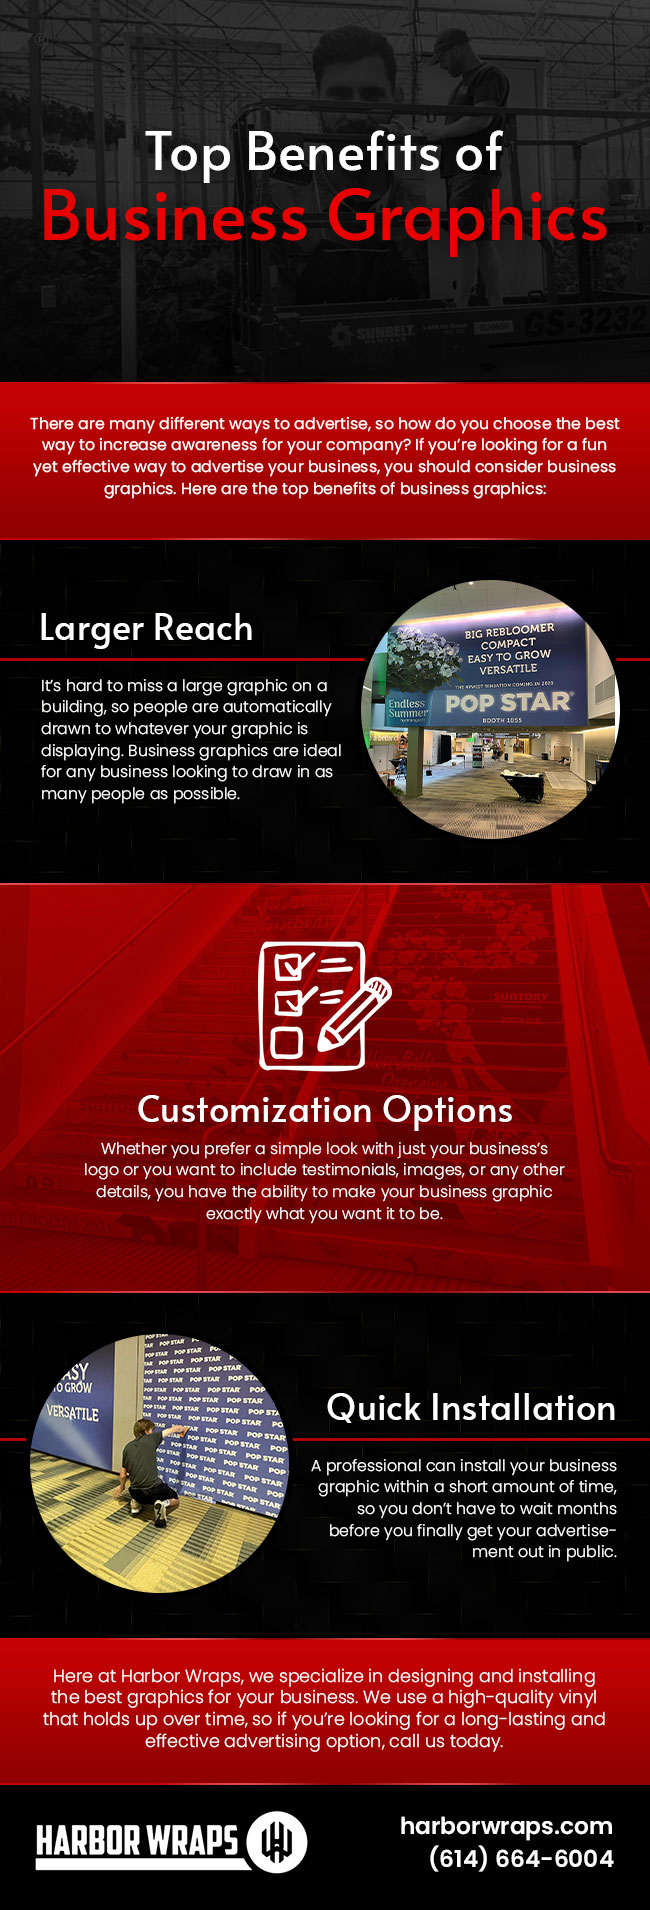 Top Benefits of Business Graphics